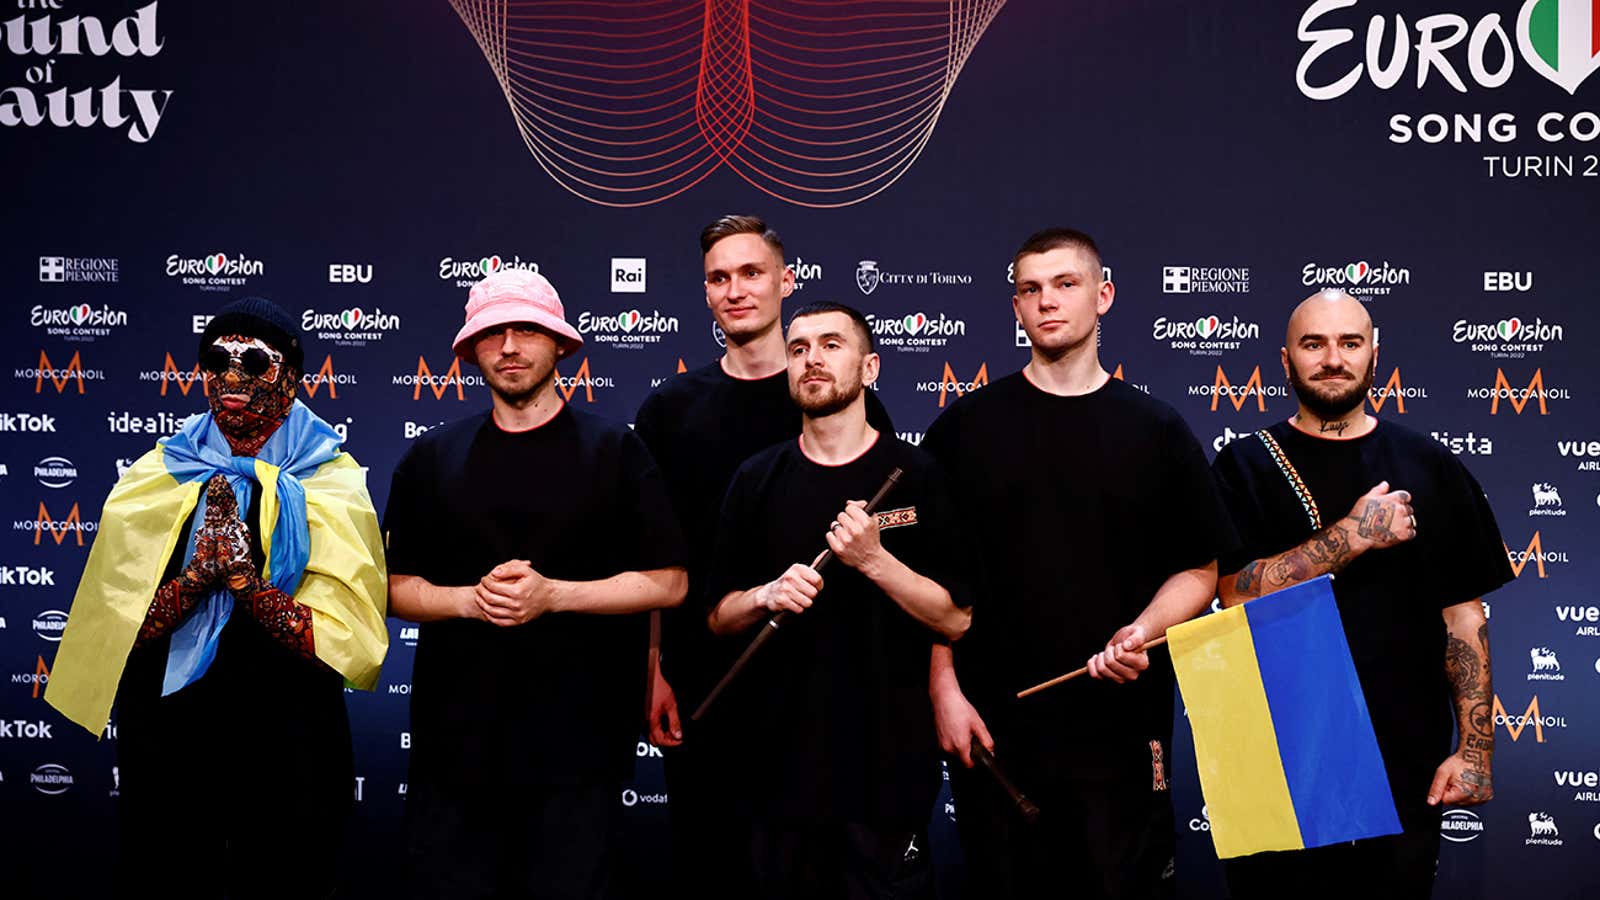 Kalush Orchestra from Ukraine pose for photographers after winning the 2022 Eurovision Song Contest, in Turin, Italy, May 15, 2022. REUTERS/Yara Nardi